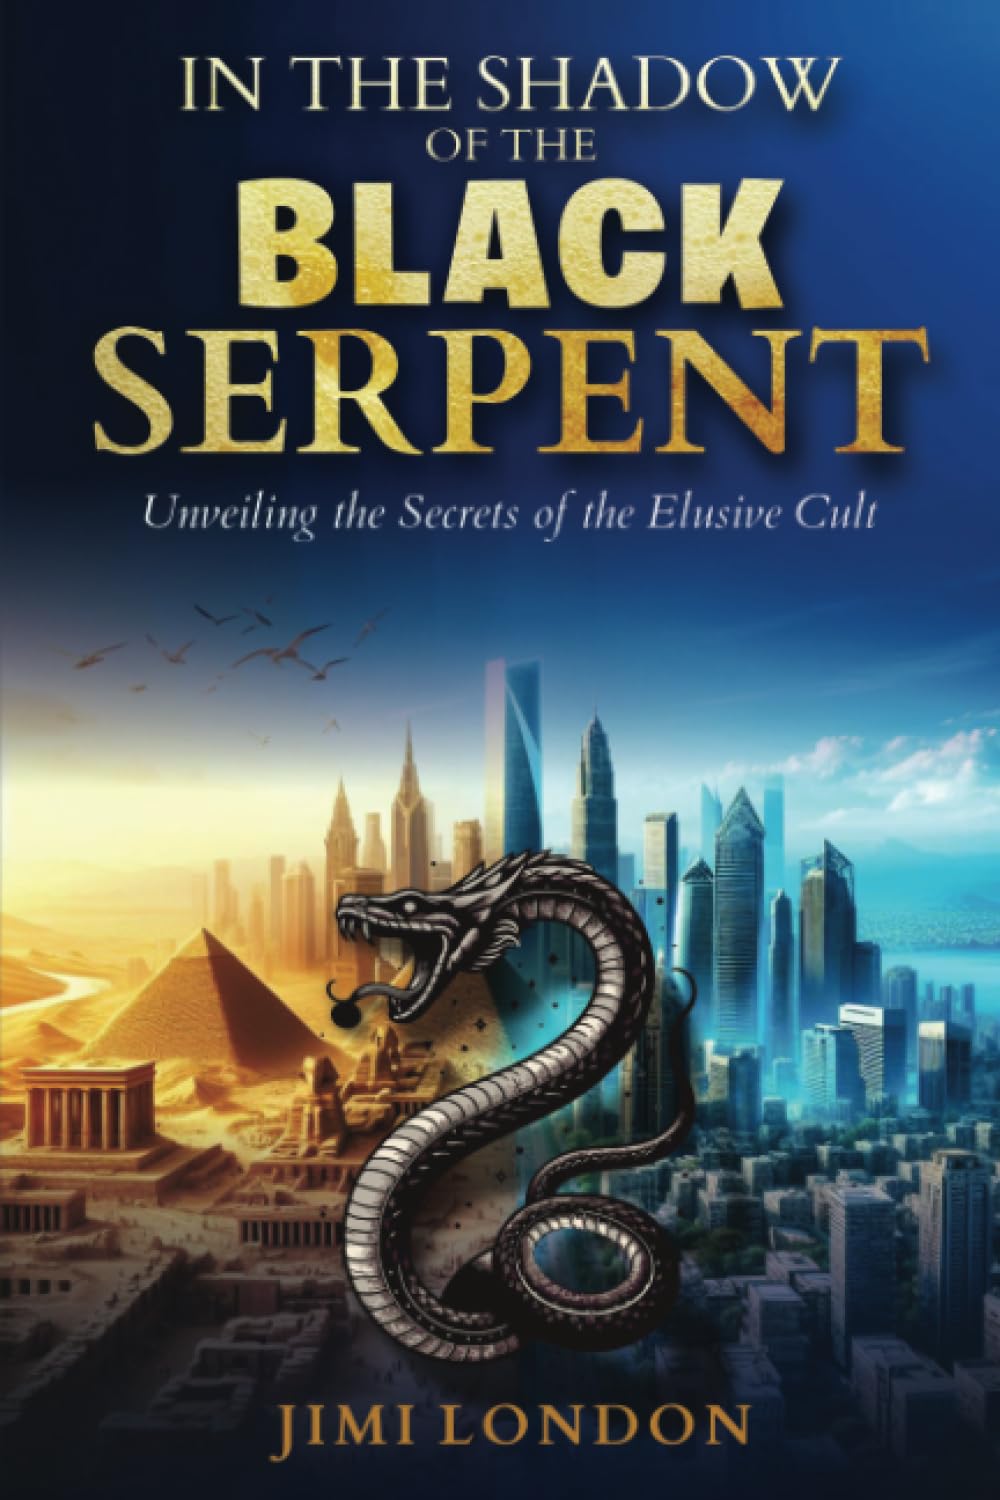 Unveiling the Shadows: "In the Shadow of the Black Serpent" by Jimi London Offers a Thrilling Exploration of Mystery and Justice